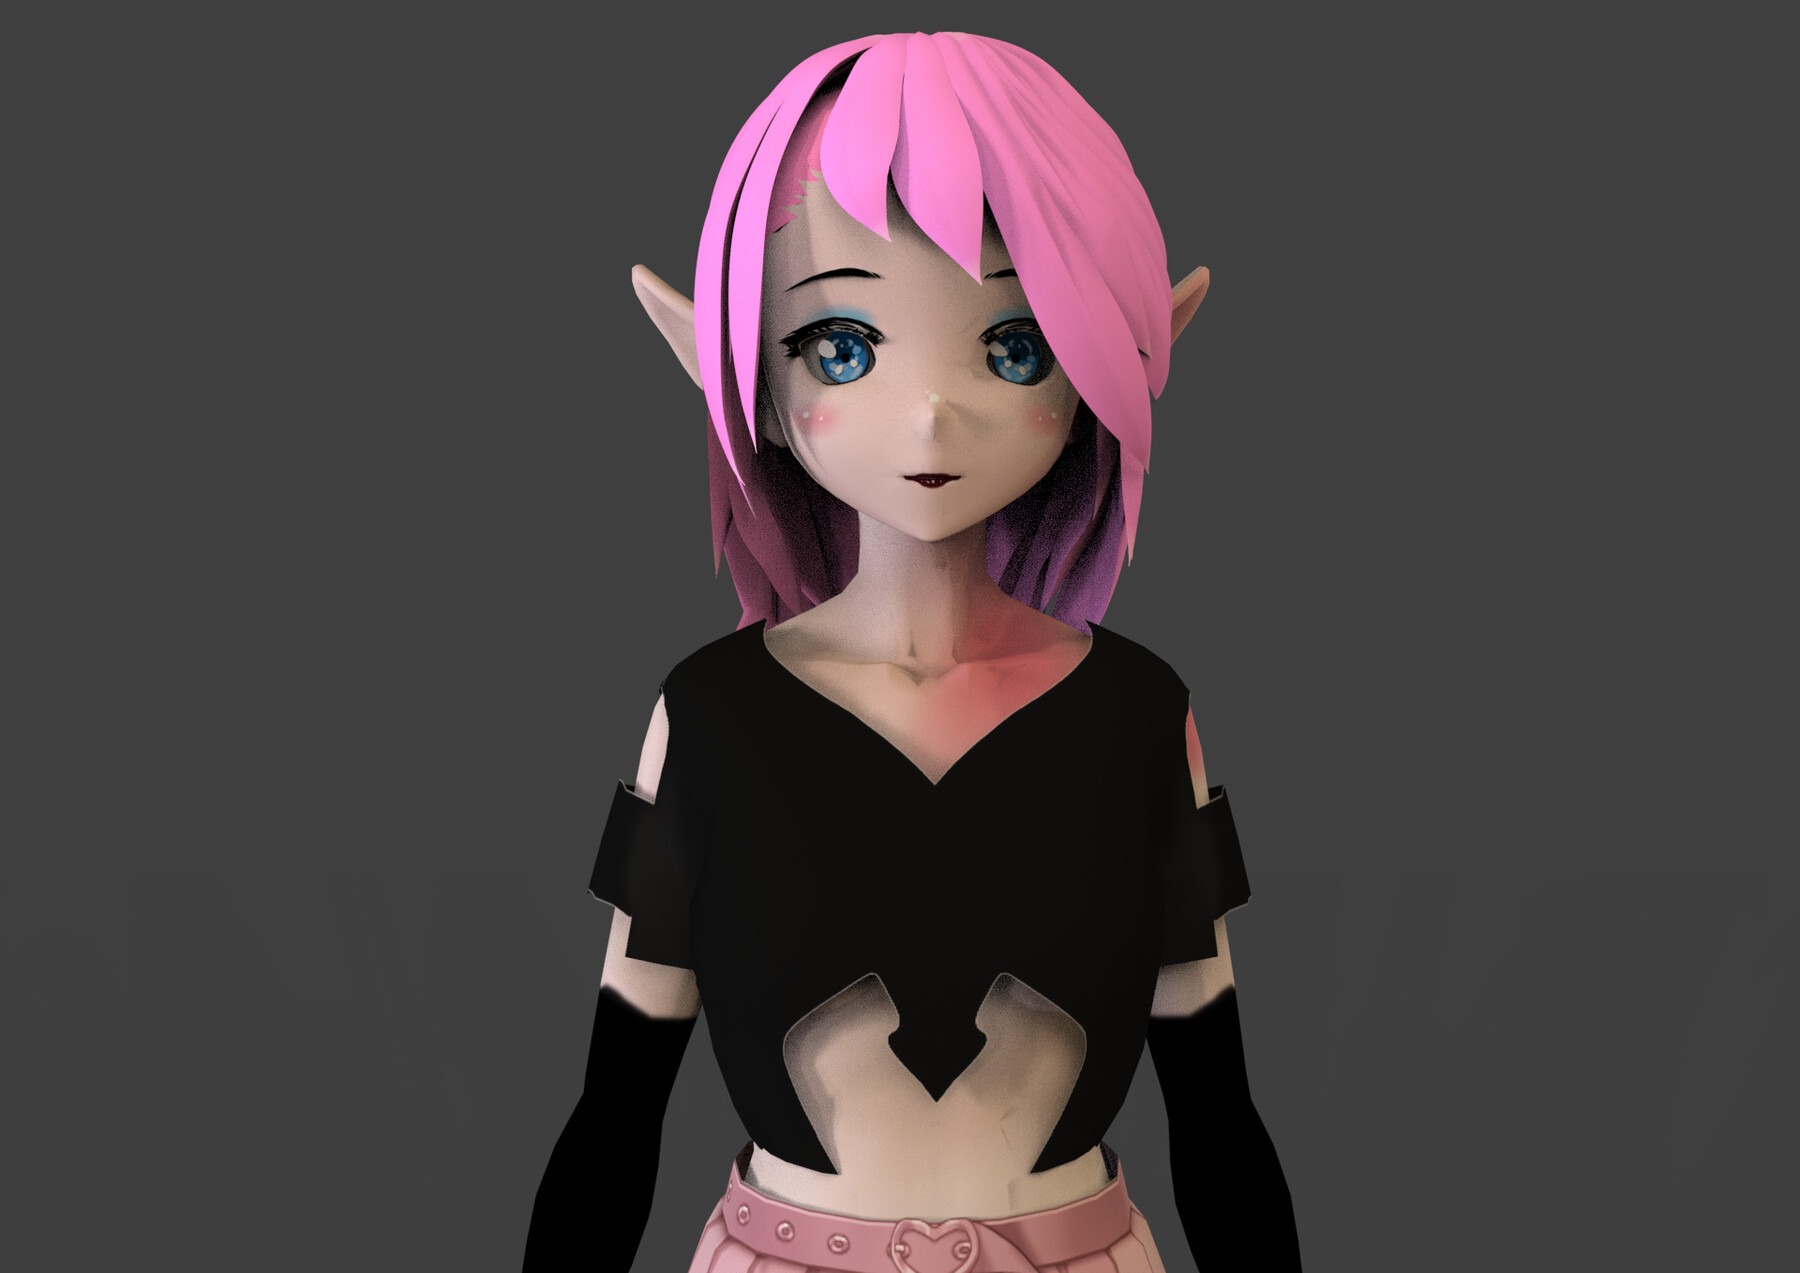 3D model game ready Low Poly Anime Character 30 VR / AR / low-poly